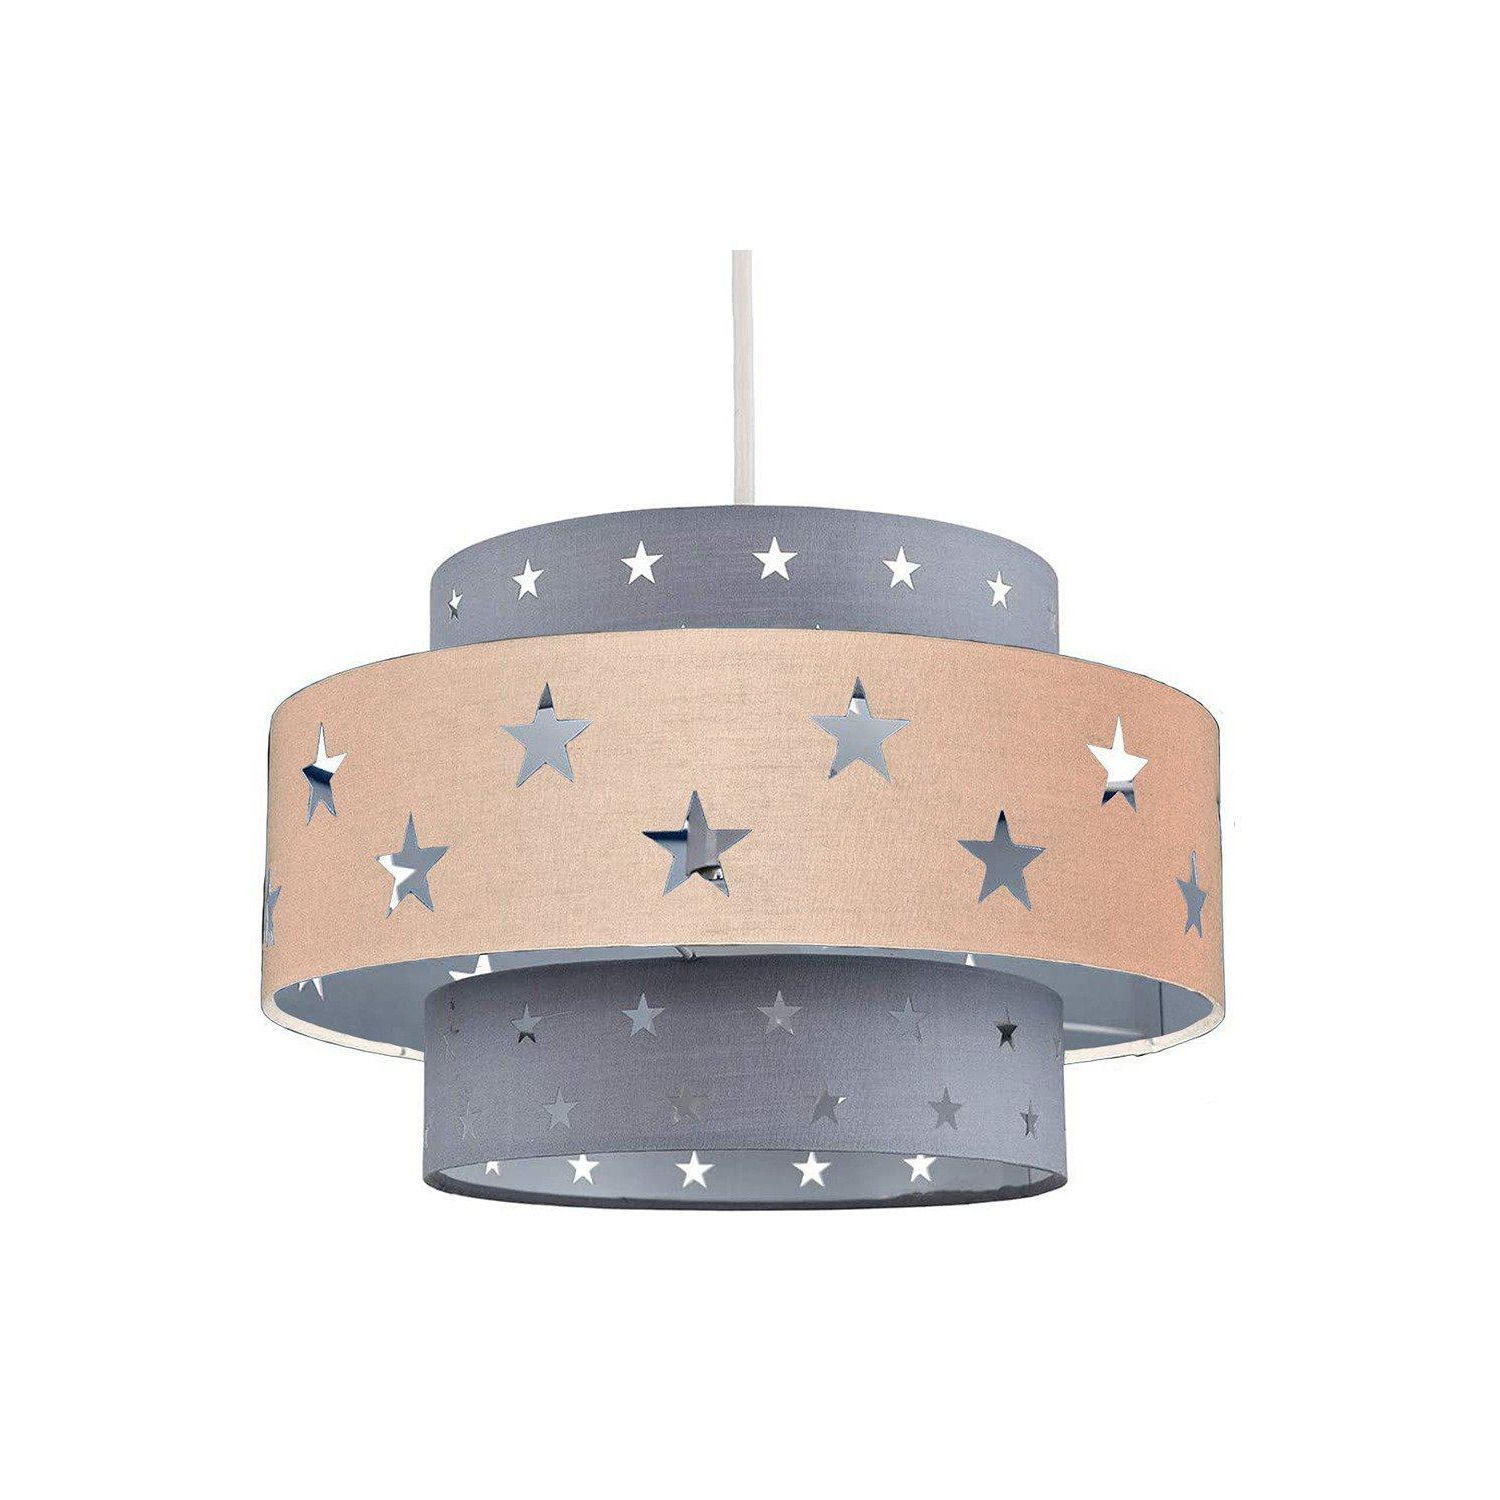 'Starlight' Grey & Cream Star Two Tier Easy Fit Lamp Shade - image 1